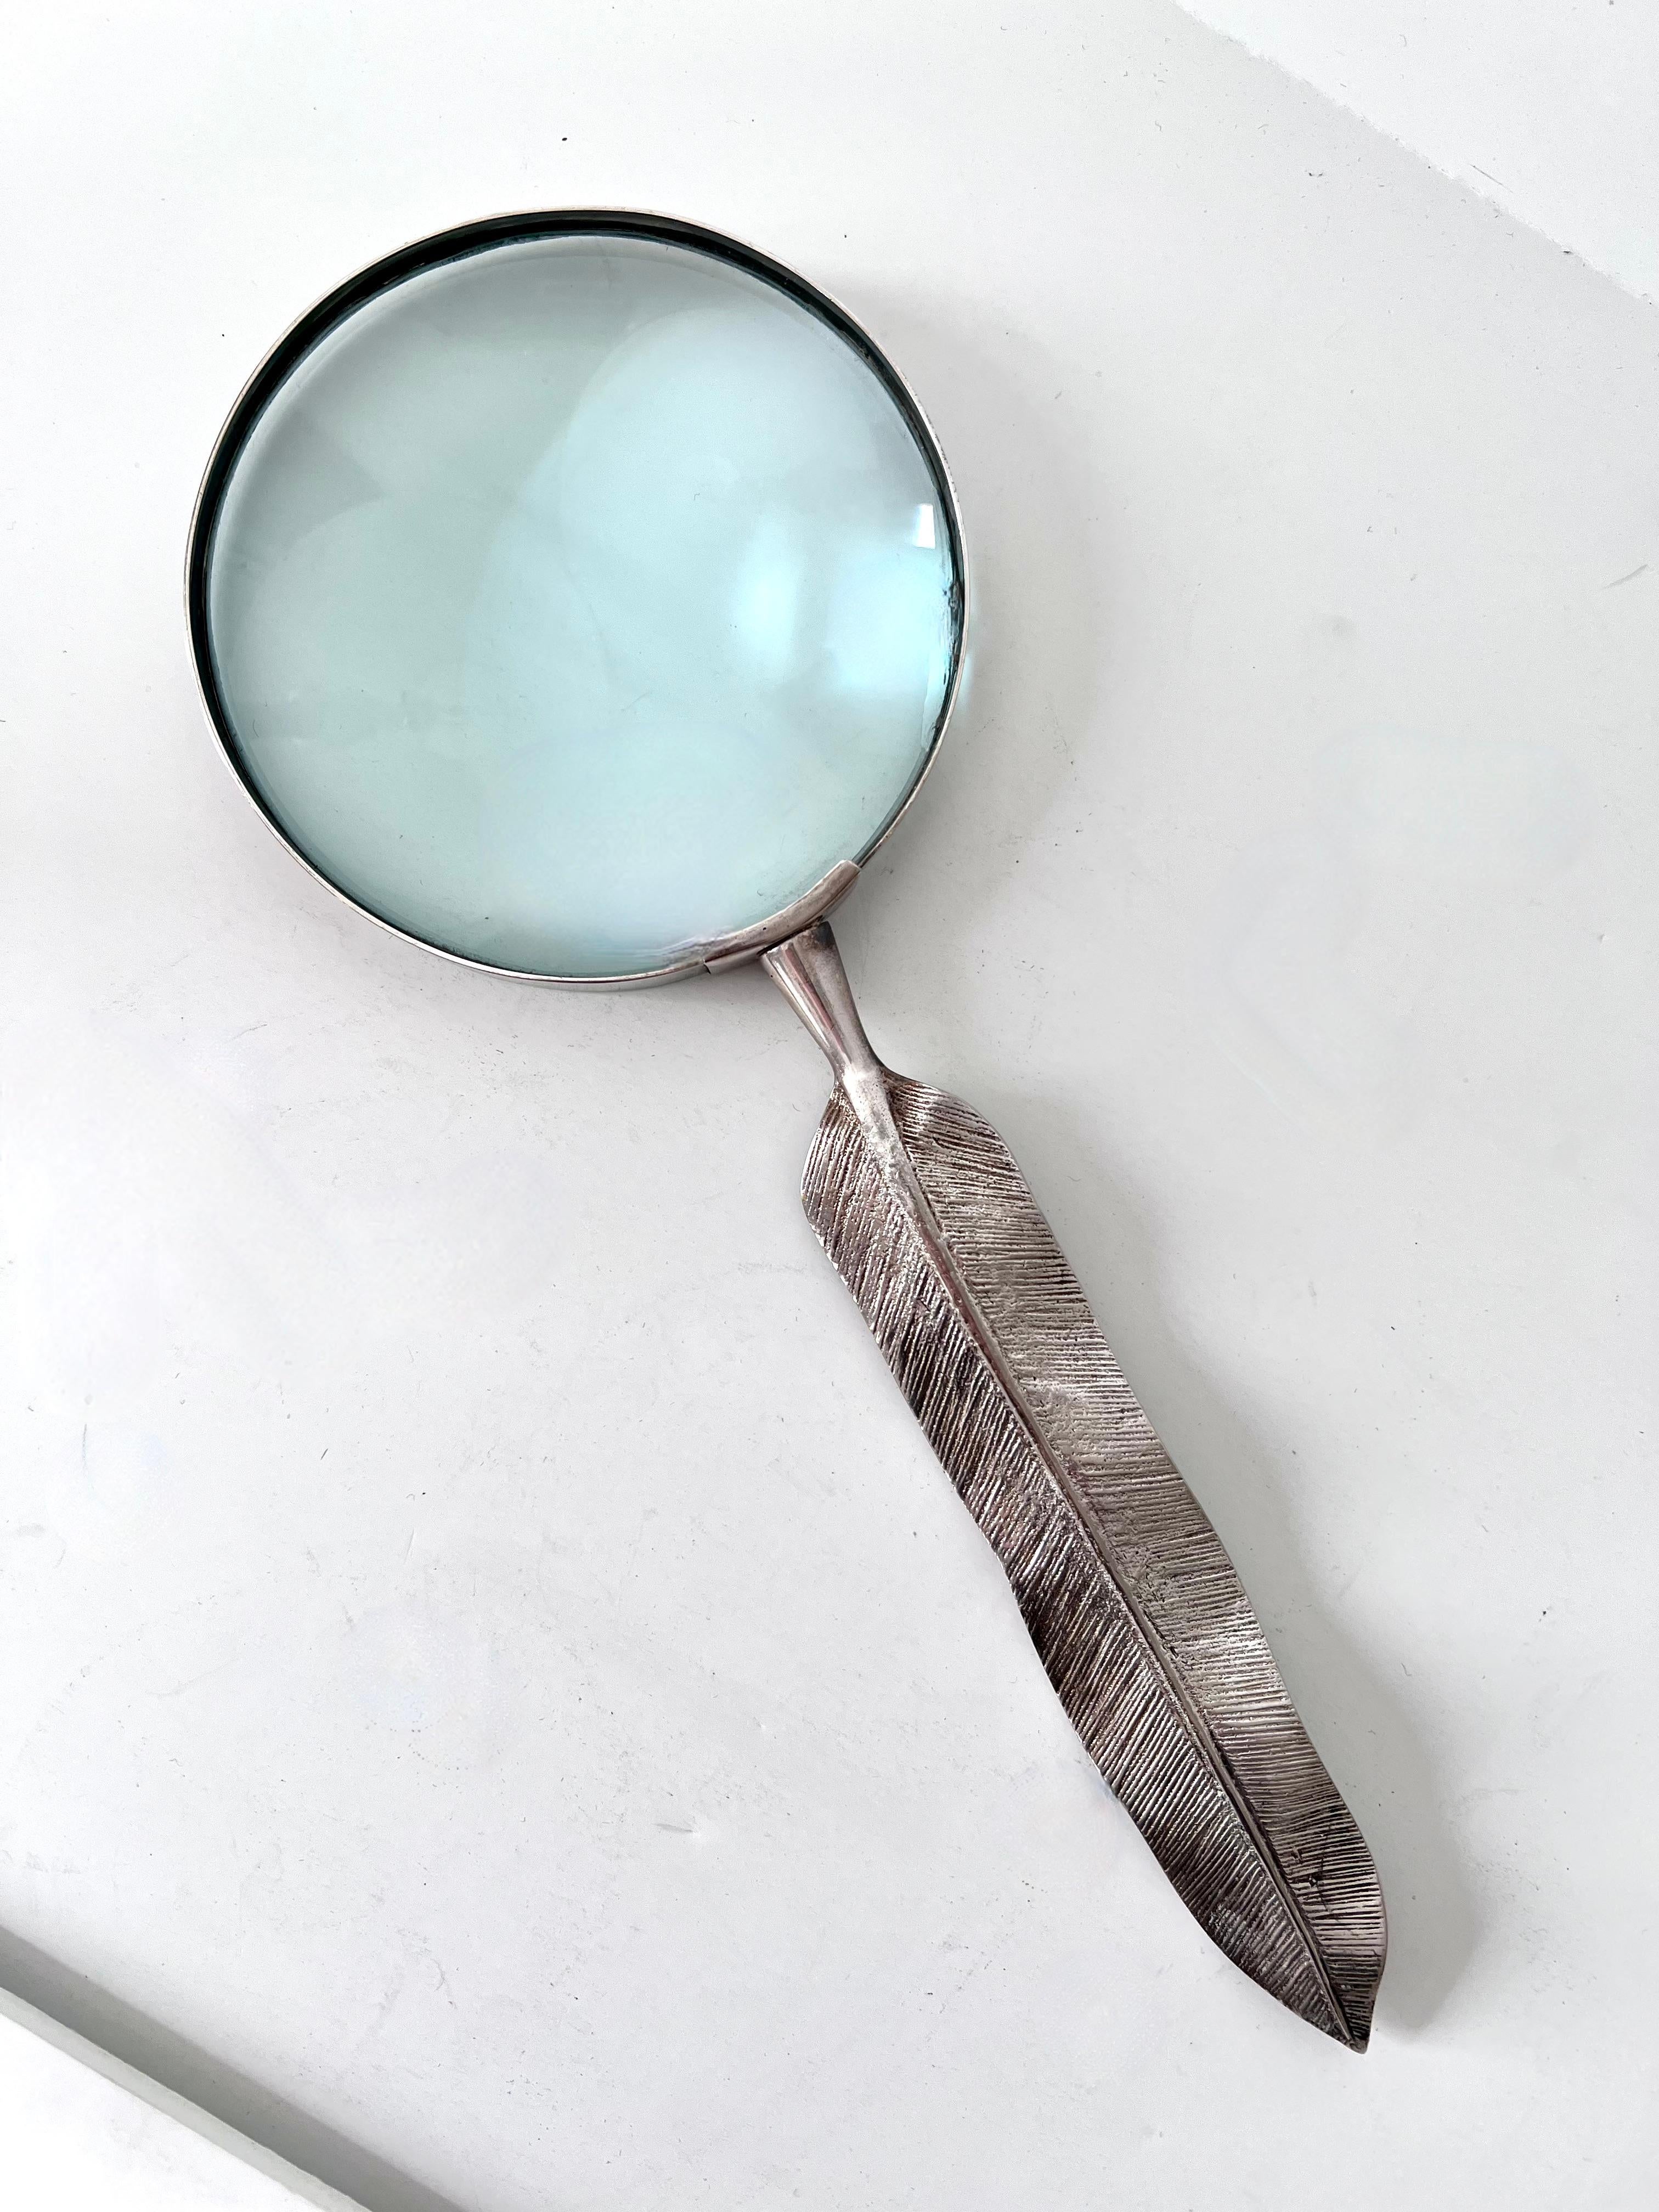 A very nice silver magnifying glass with a feather handle, which could be used for opening letters as well. The magnification is good and works well. A compliment to any desk or work station.